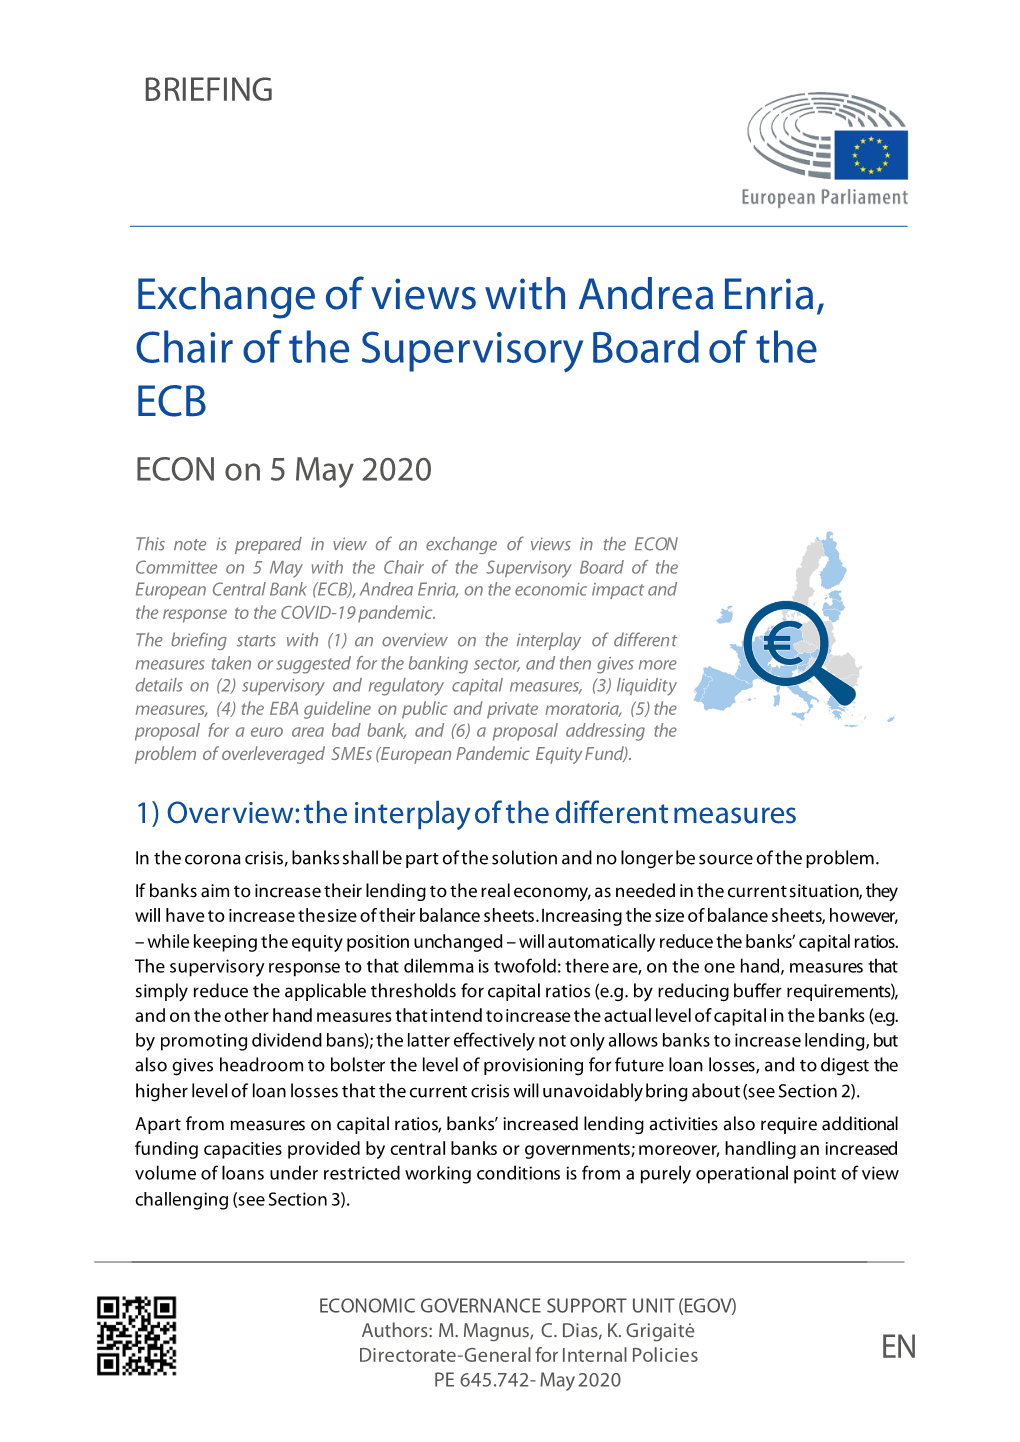 Exchange of Views with Andrea Enria, Chair of the ECB Supervisory Board